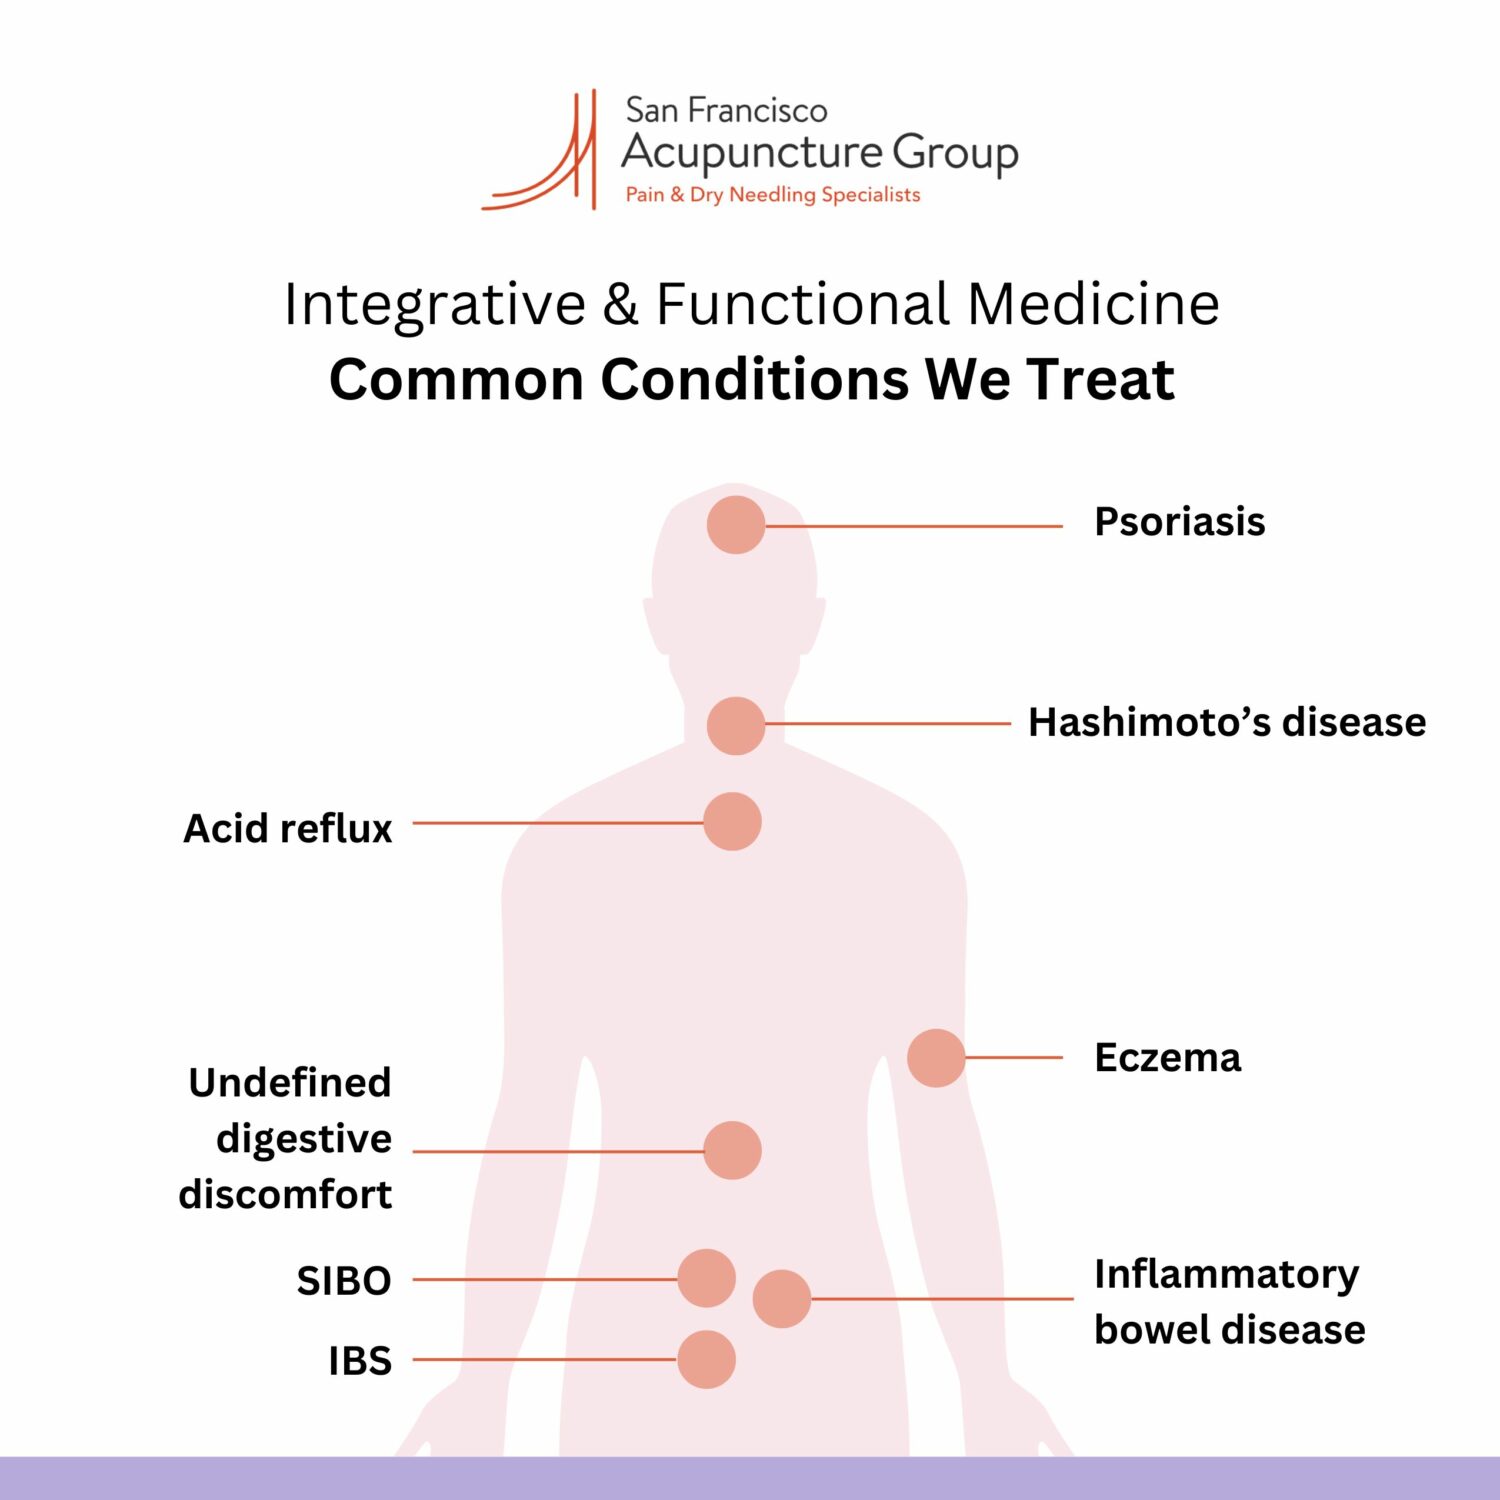 Infographic depicting list of common digestive and autoimmune conditions we treat: SIBO; IBS; acid reflux; undefined digestive discomfort; inflammatory bowel disease; Hashimoto’s; psoriasis; eczema.